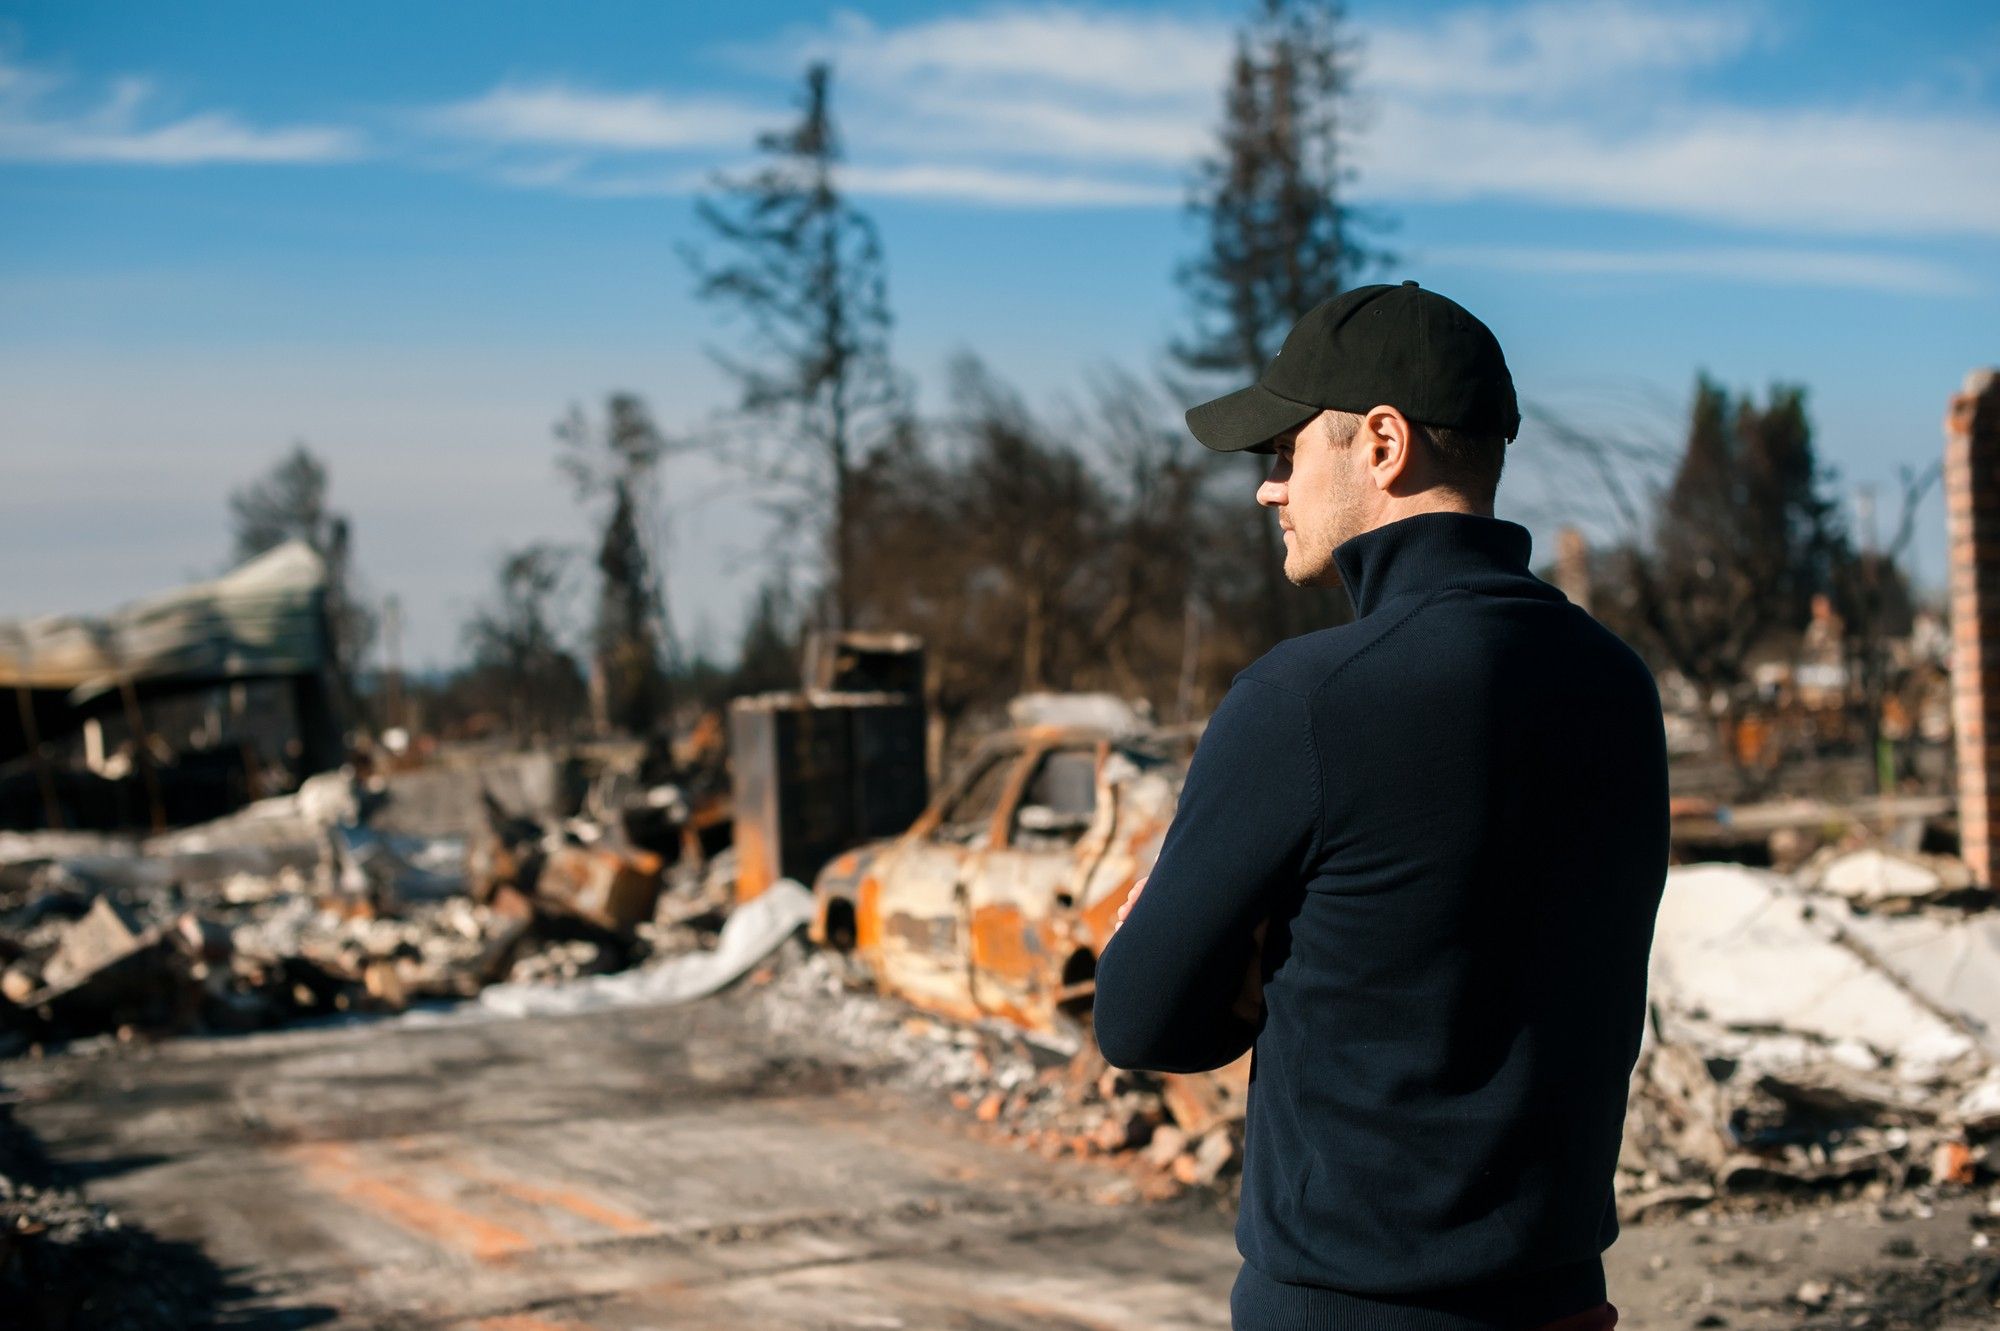 Fire Victim Trust is supposed to help wildfire victims.